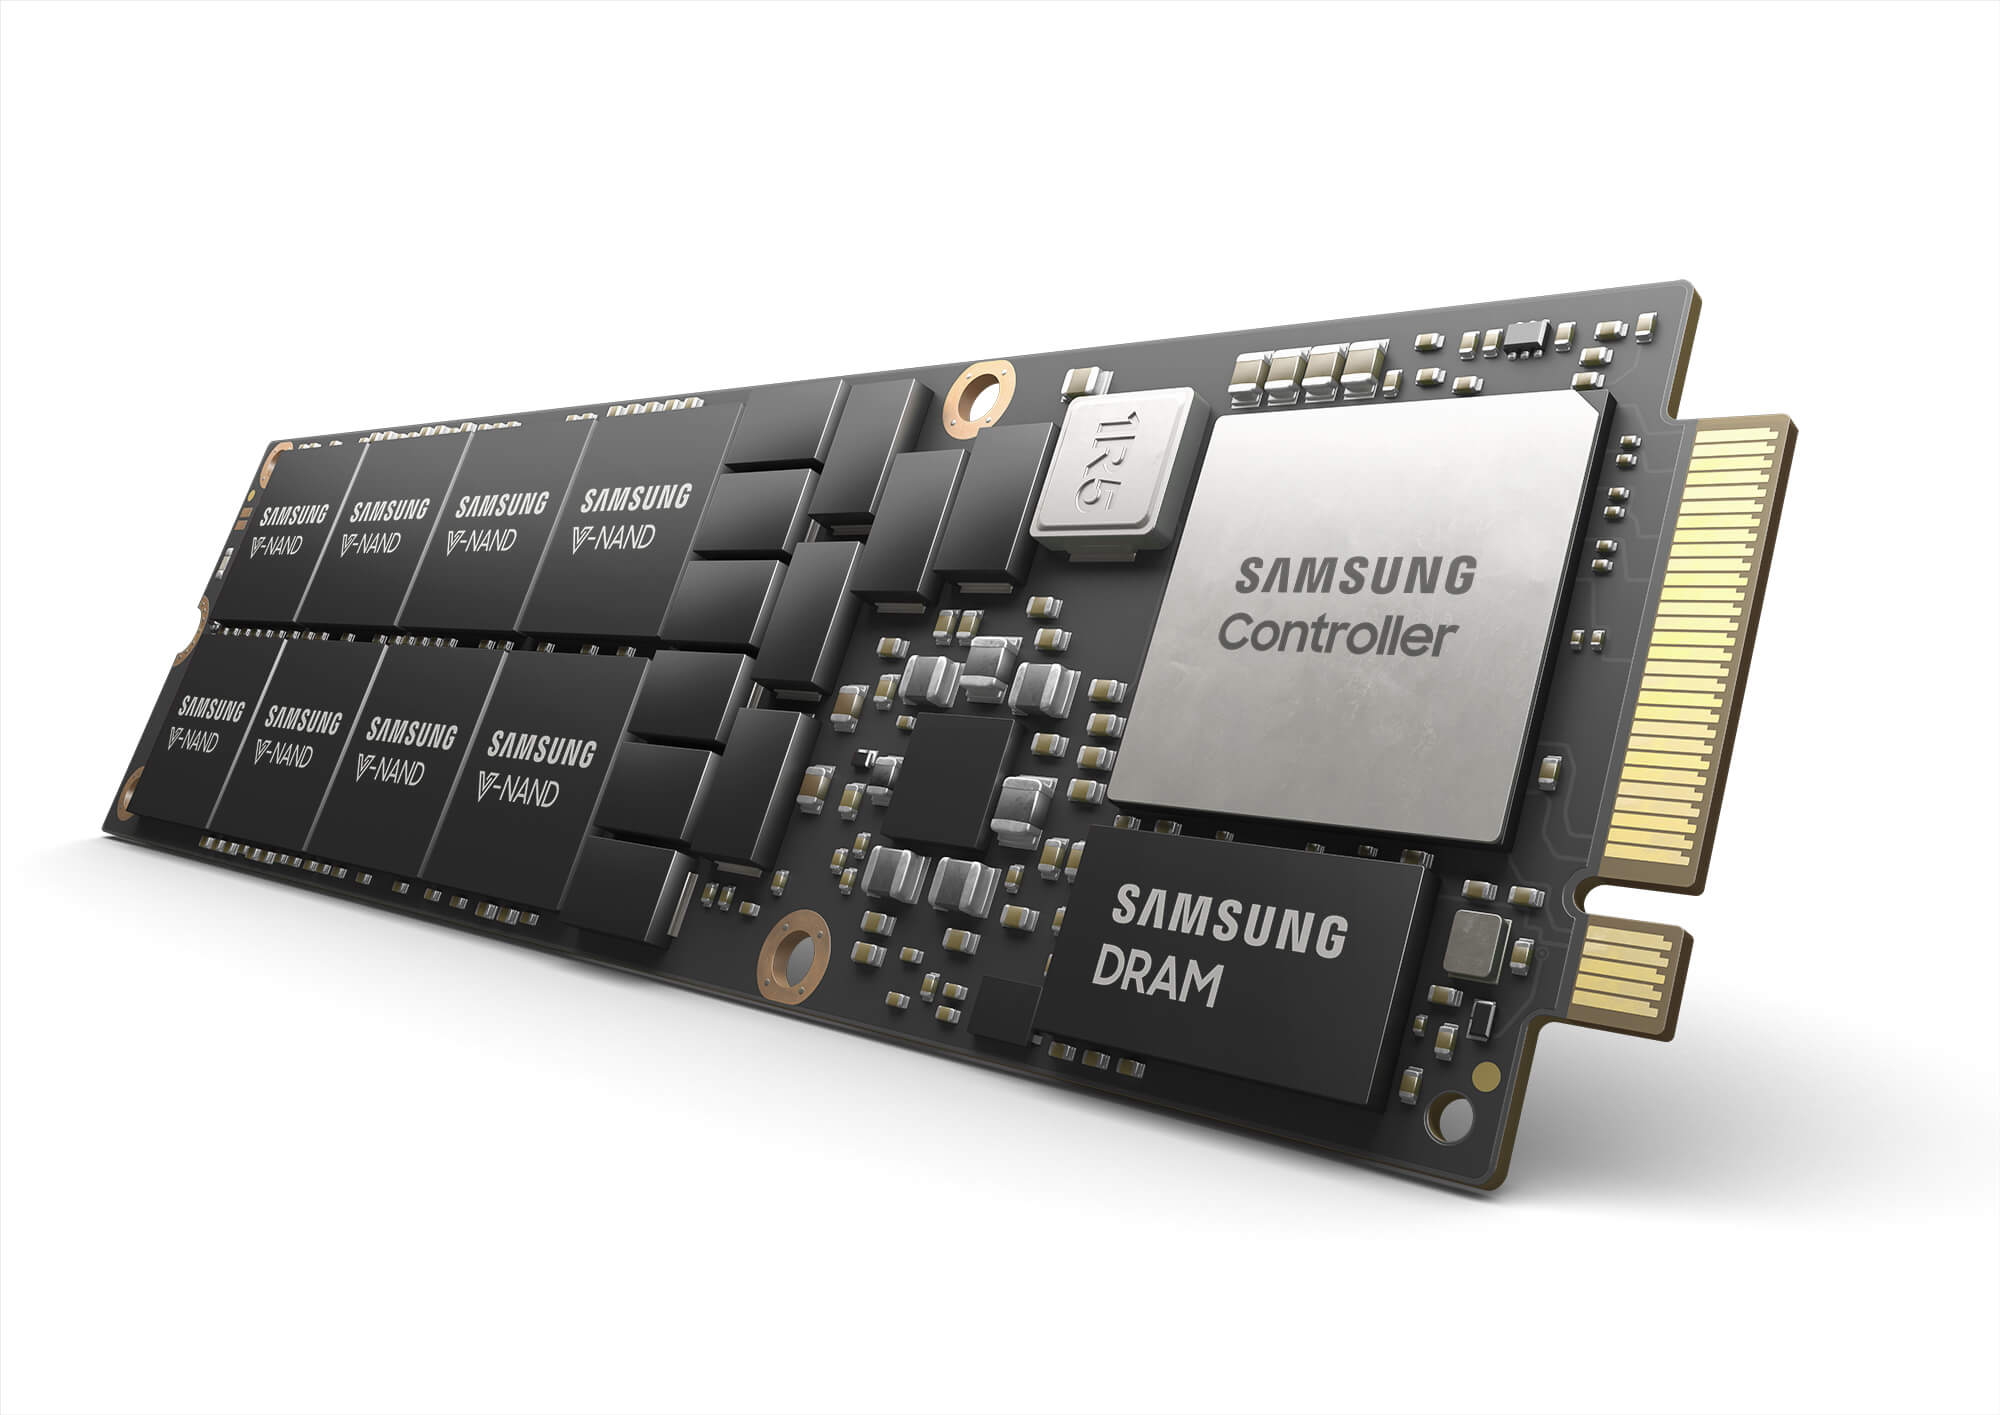 Samsung launches 8TB NVMe solid state drive in NF1 form factor